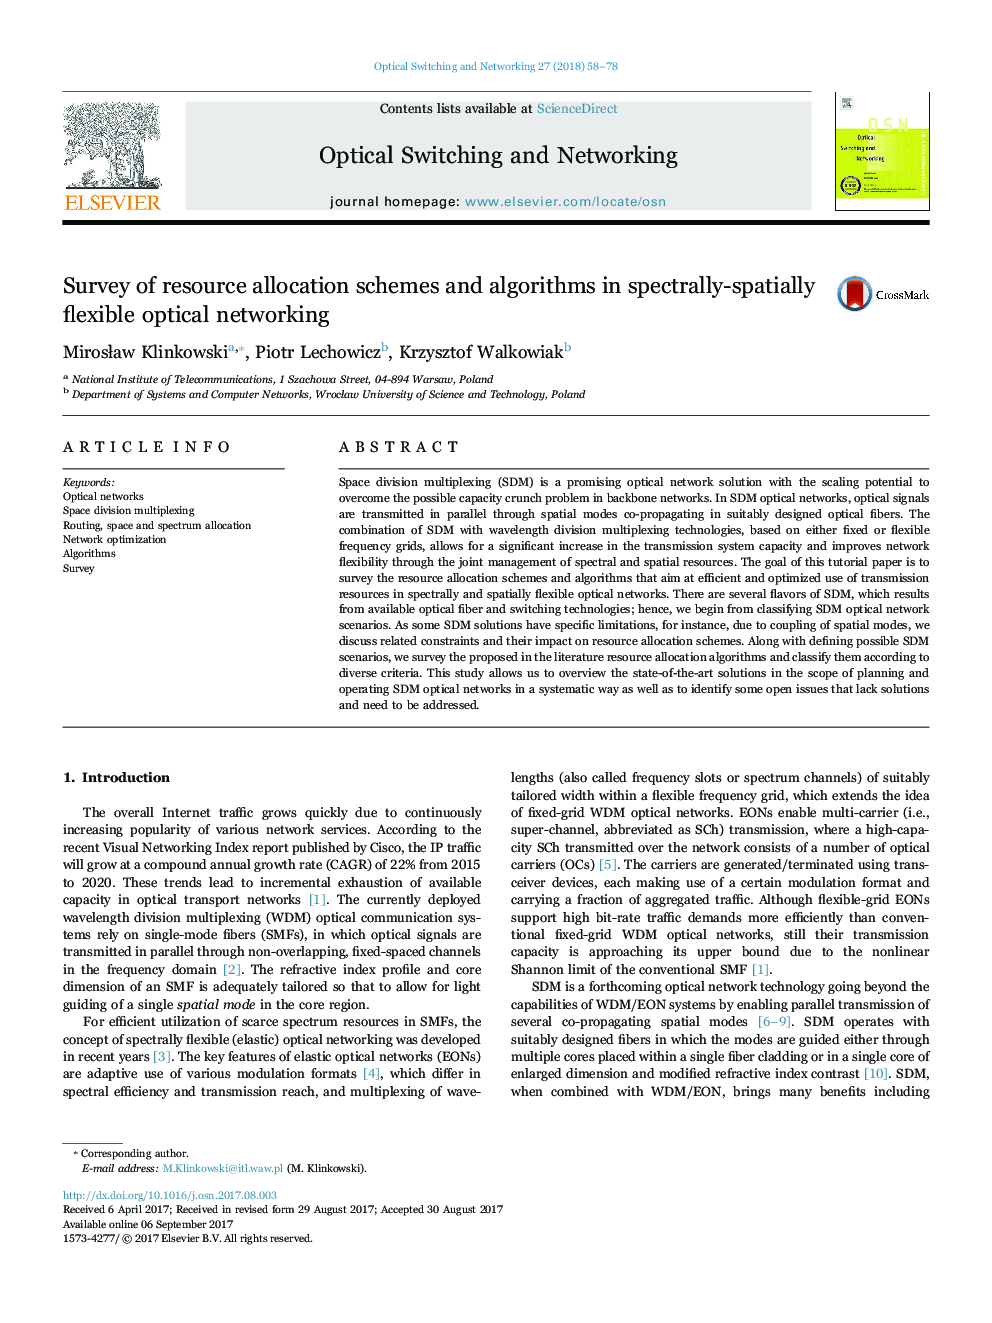 Survey of resource allocation schemes and algorithms in spectrally-spatially flexible optical networking